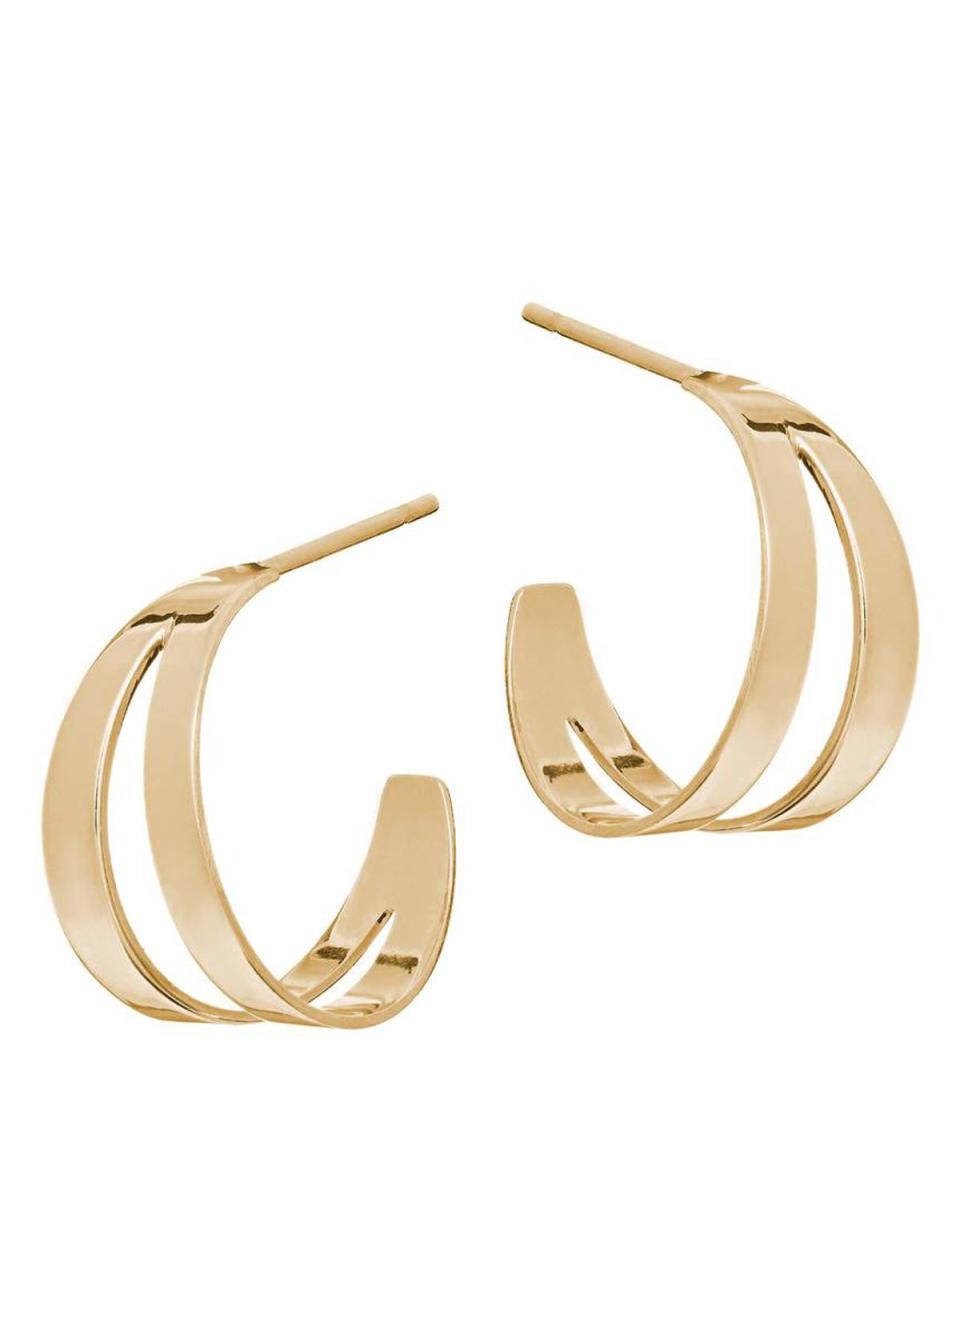 "These hoop earrings are just so timeless and can pull any outfit together." —IH